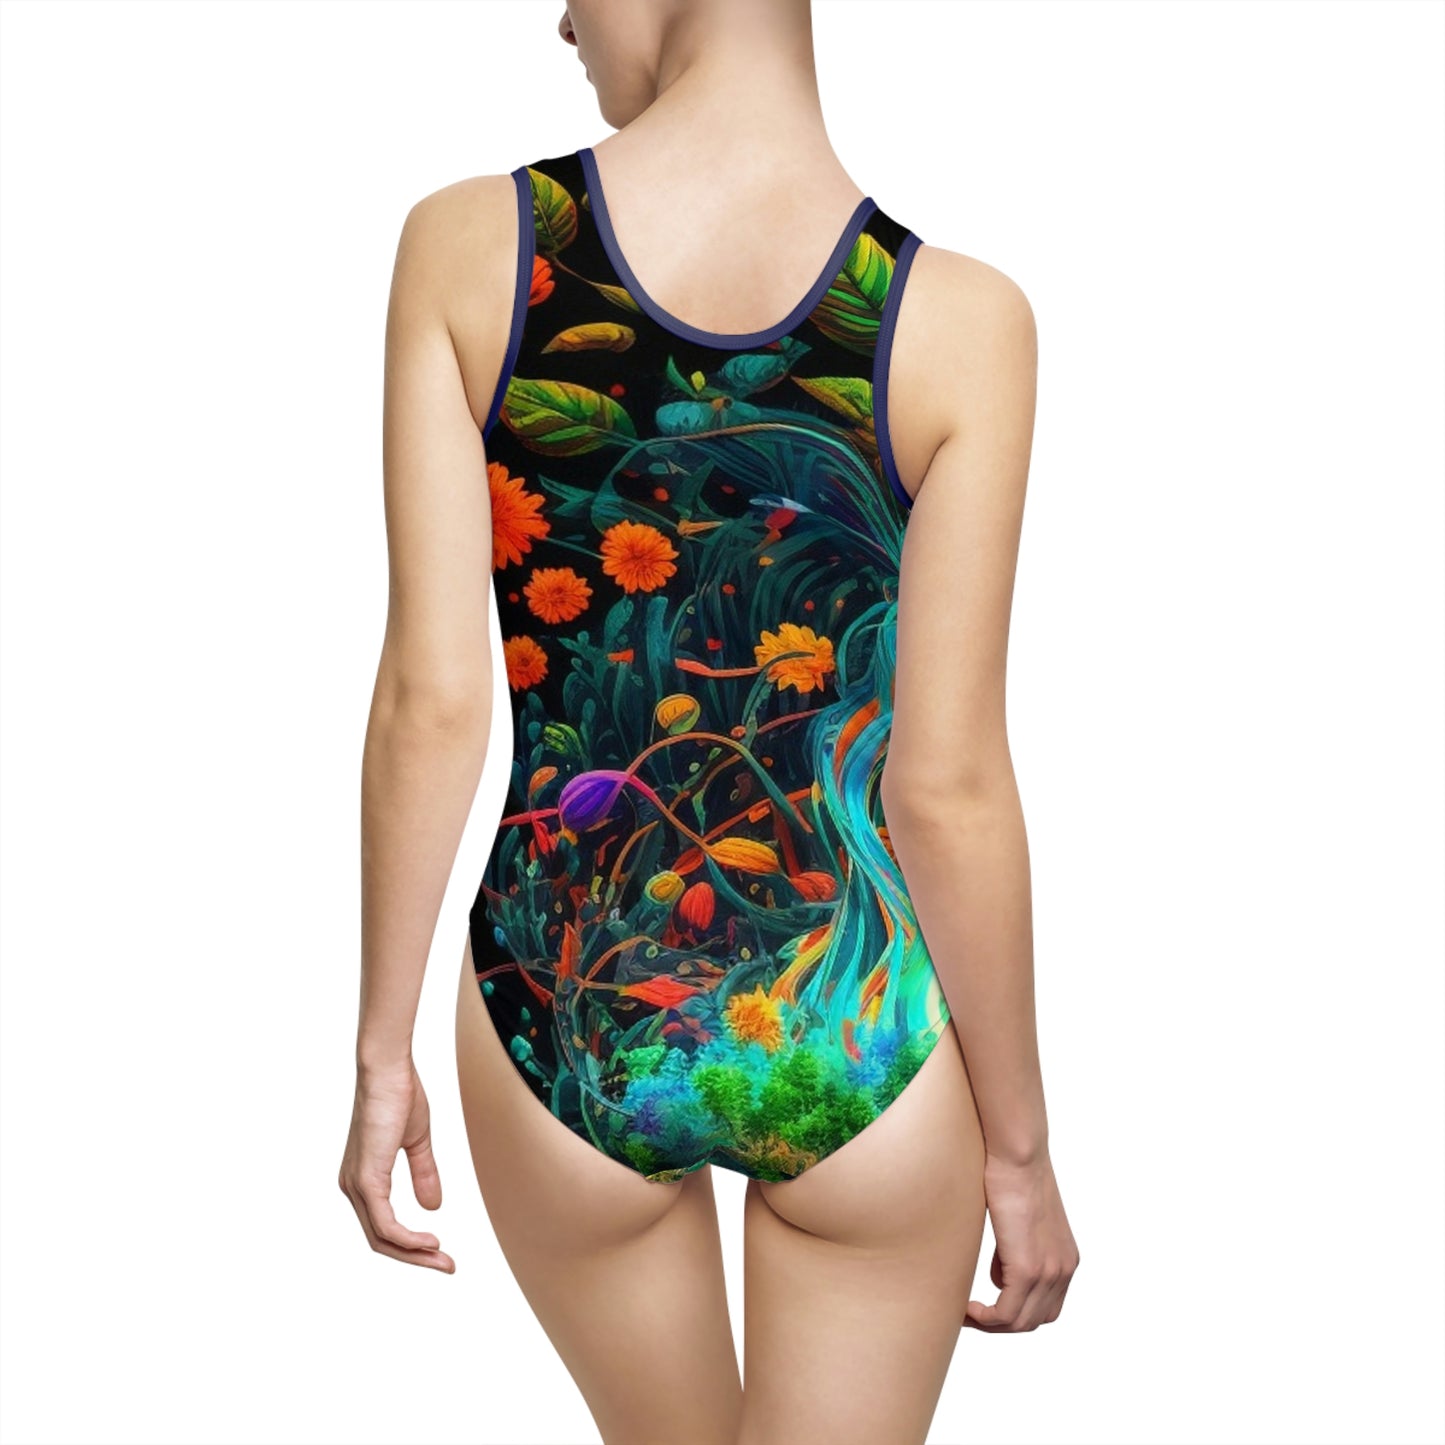 Women's Classic One-Piece Swimsuit (AOP) influence on global 3.1